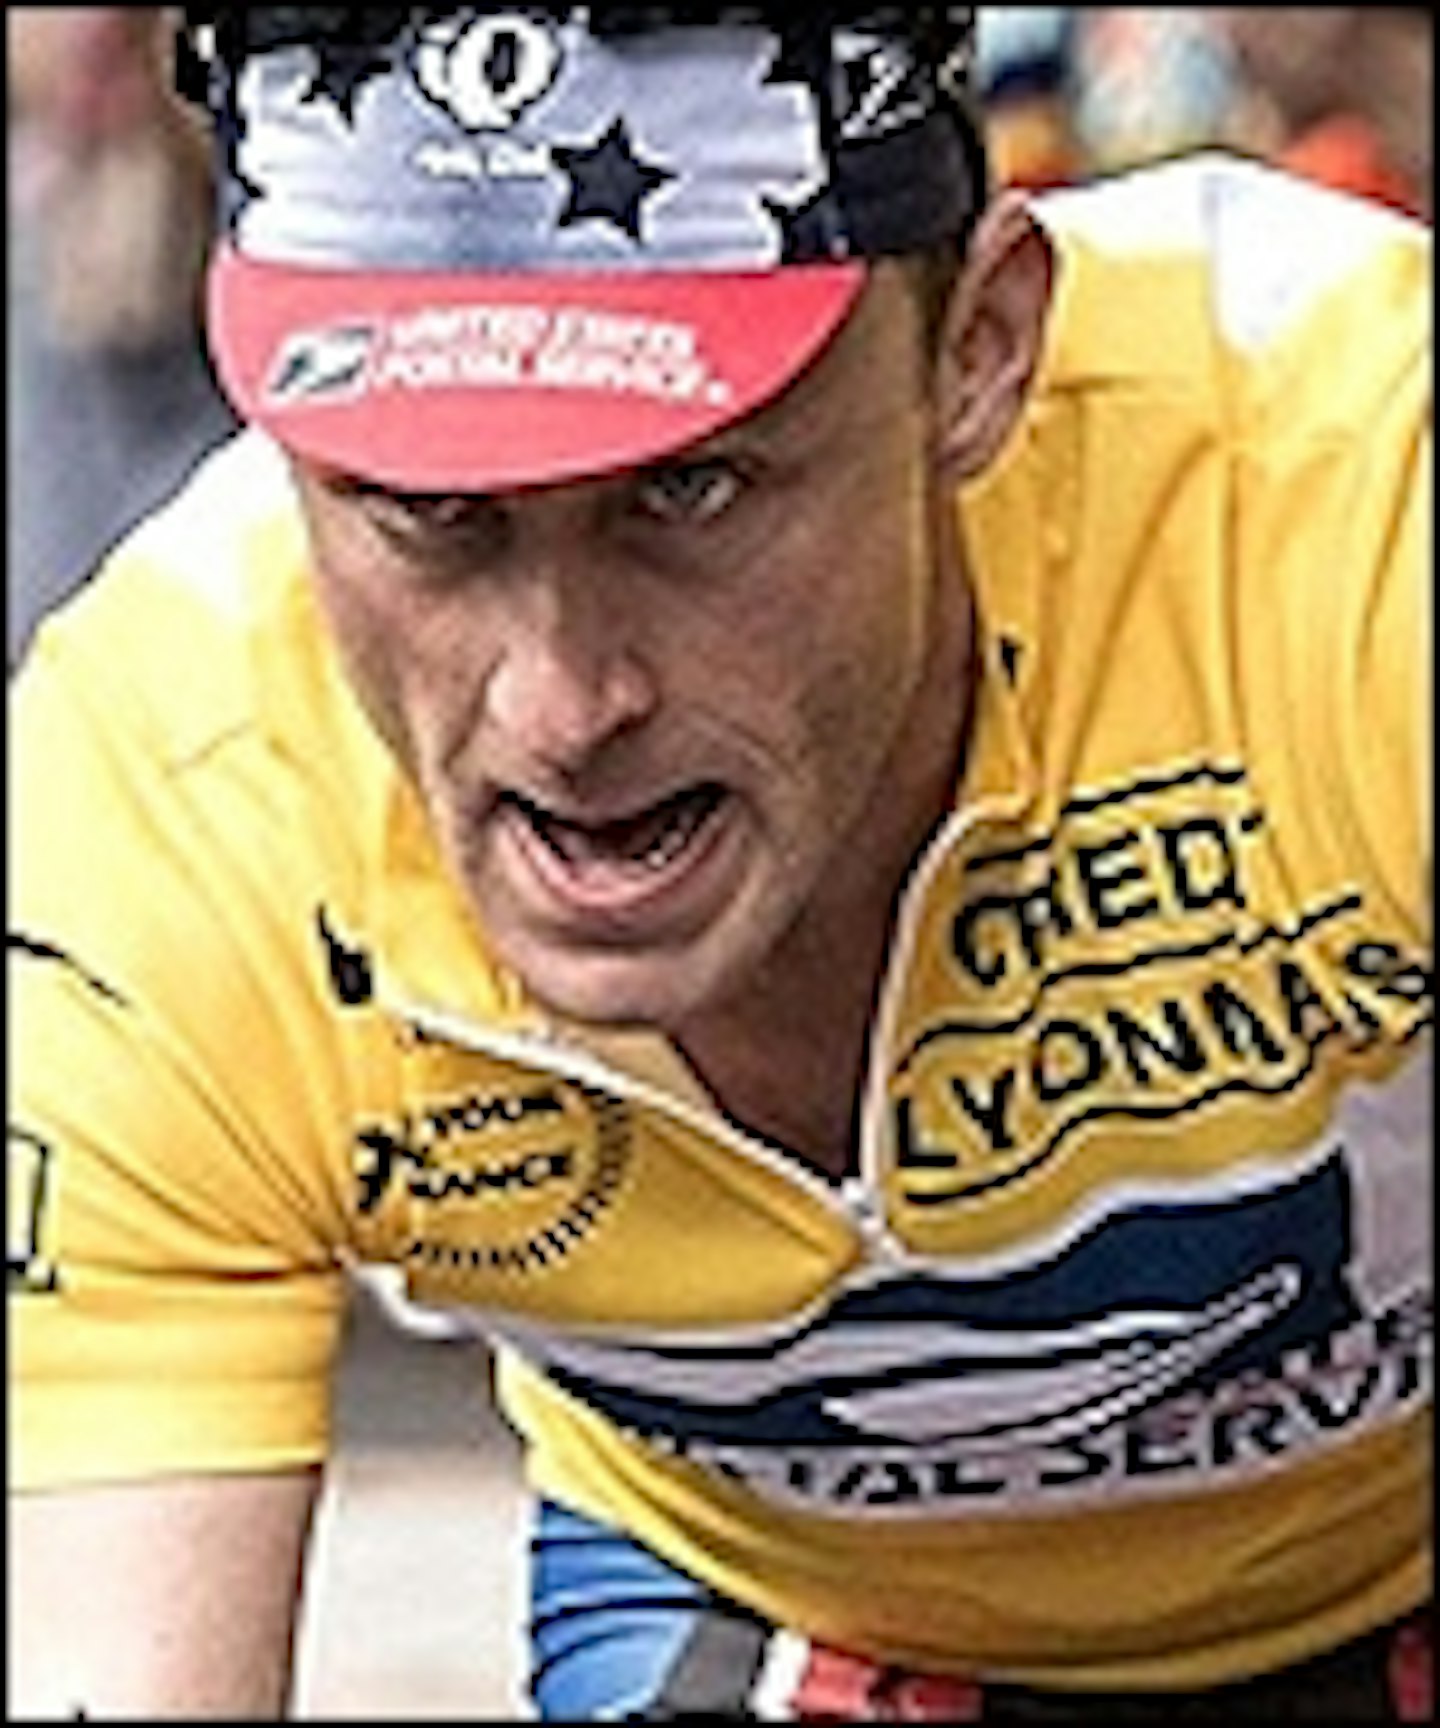 Stephen Frears' Lance Armstrong Film Gets A New Title